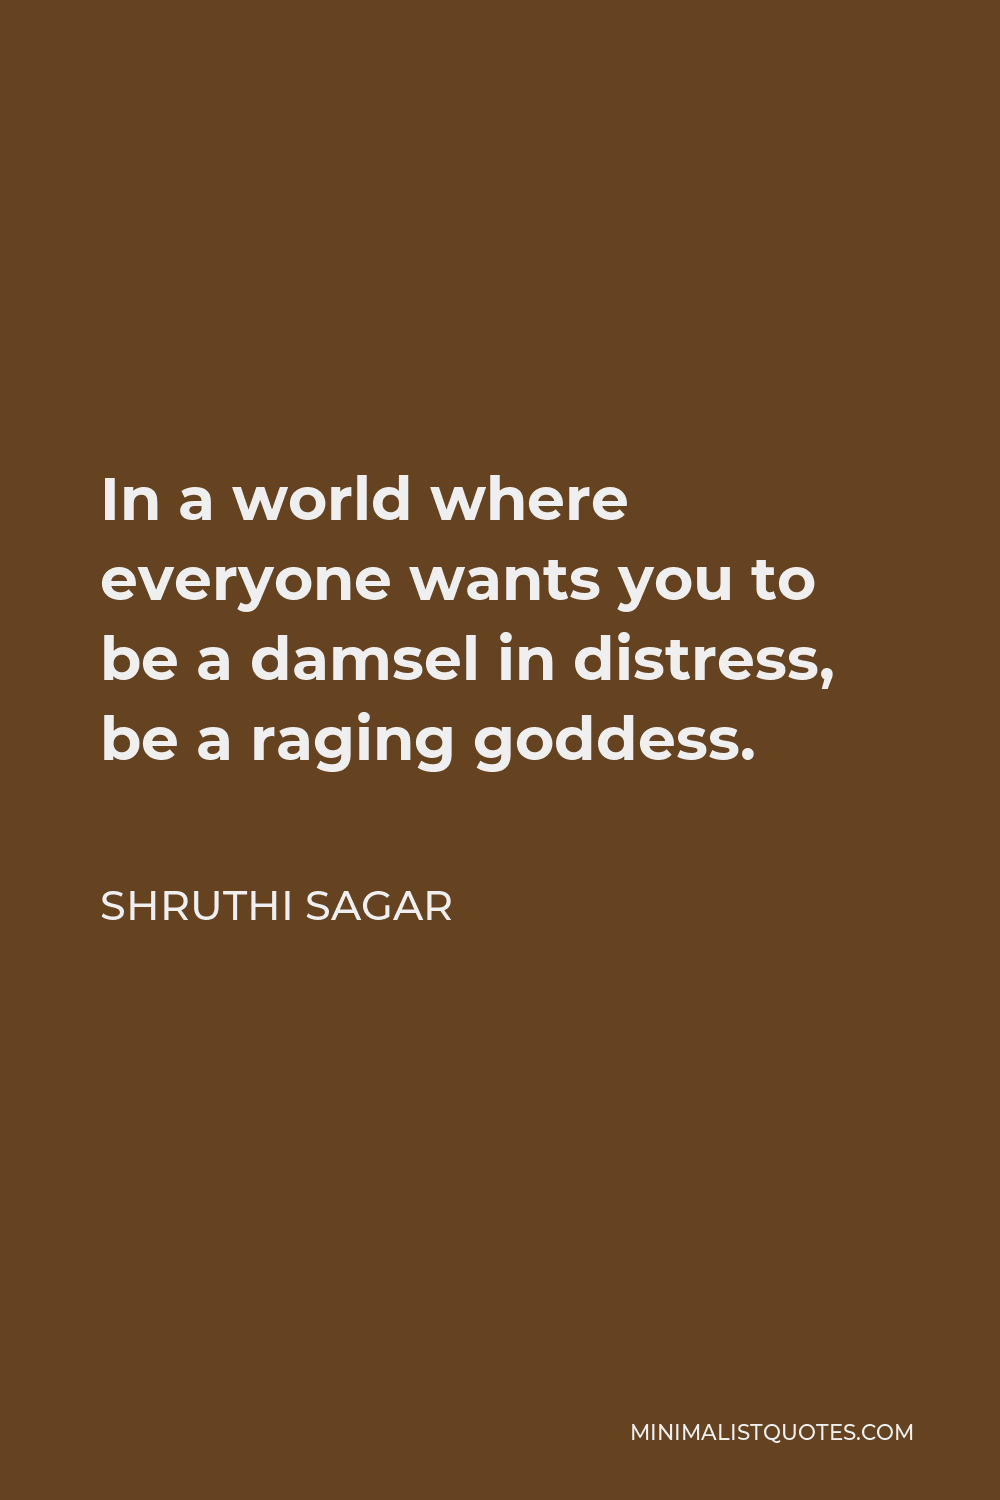 Shruthi Sagar Quote - In a world where everyone wants you to be a damsel in distress, be a raging goddess.